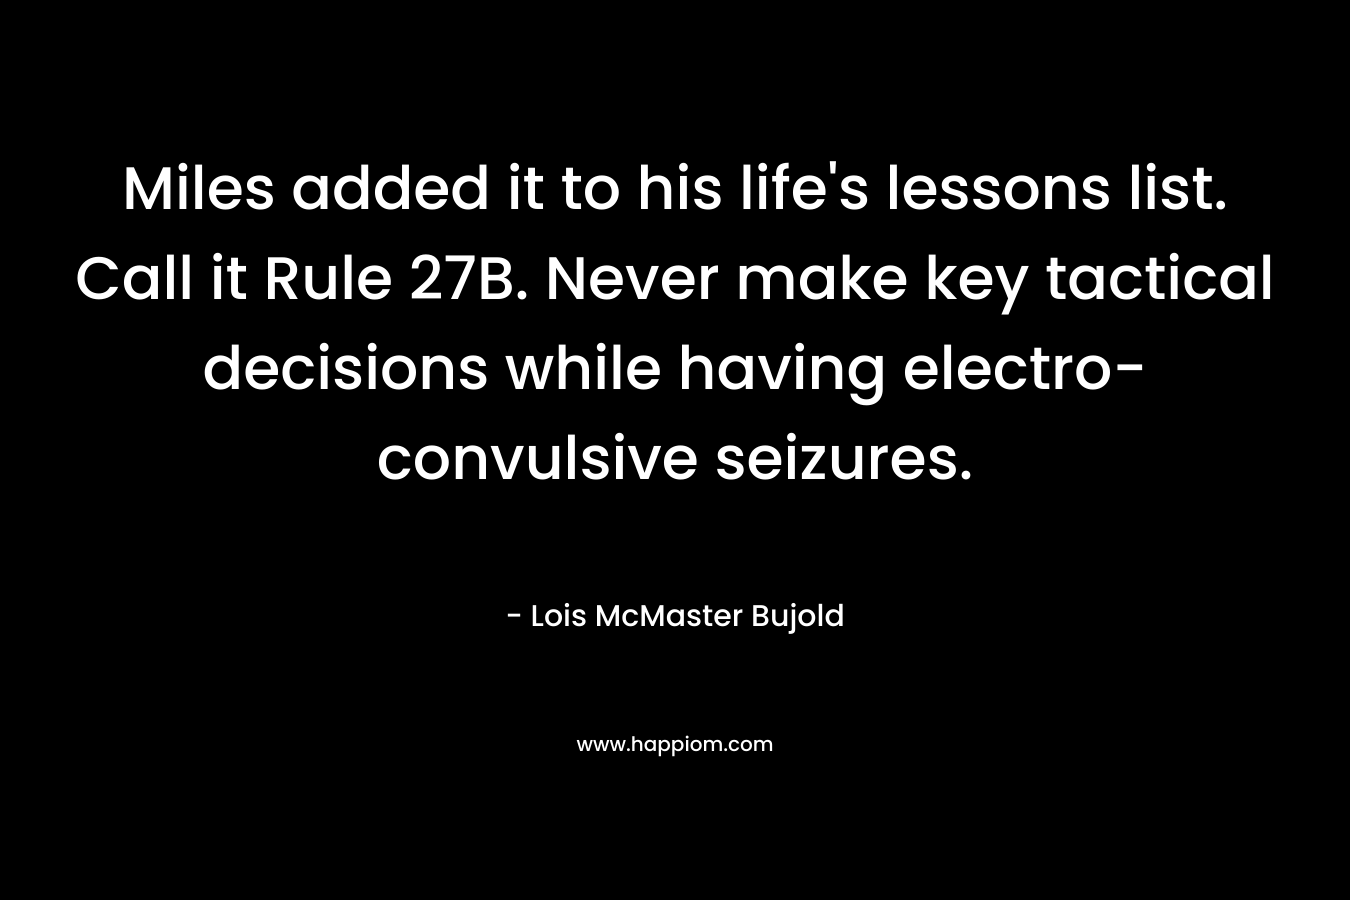 Miles added it to his life’s lessons list. Call it Rule 27B. Never make key tactical decisions while having electro-convulsive seizures. – Lois McMaster Bujold